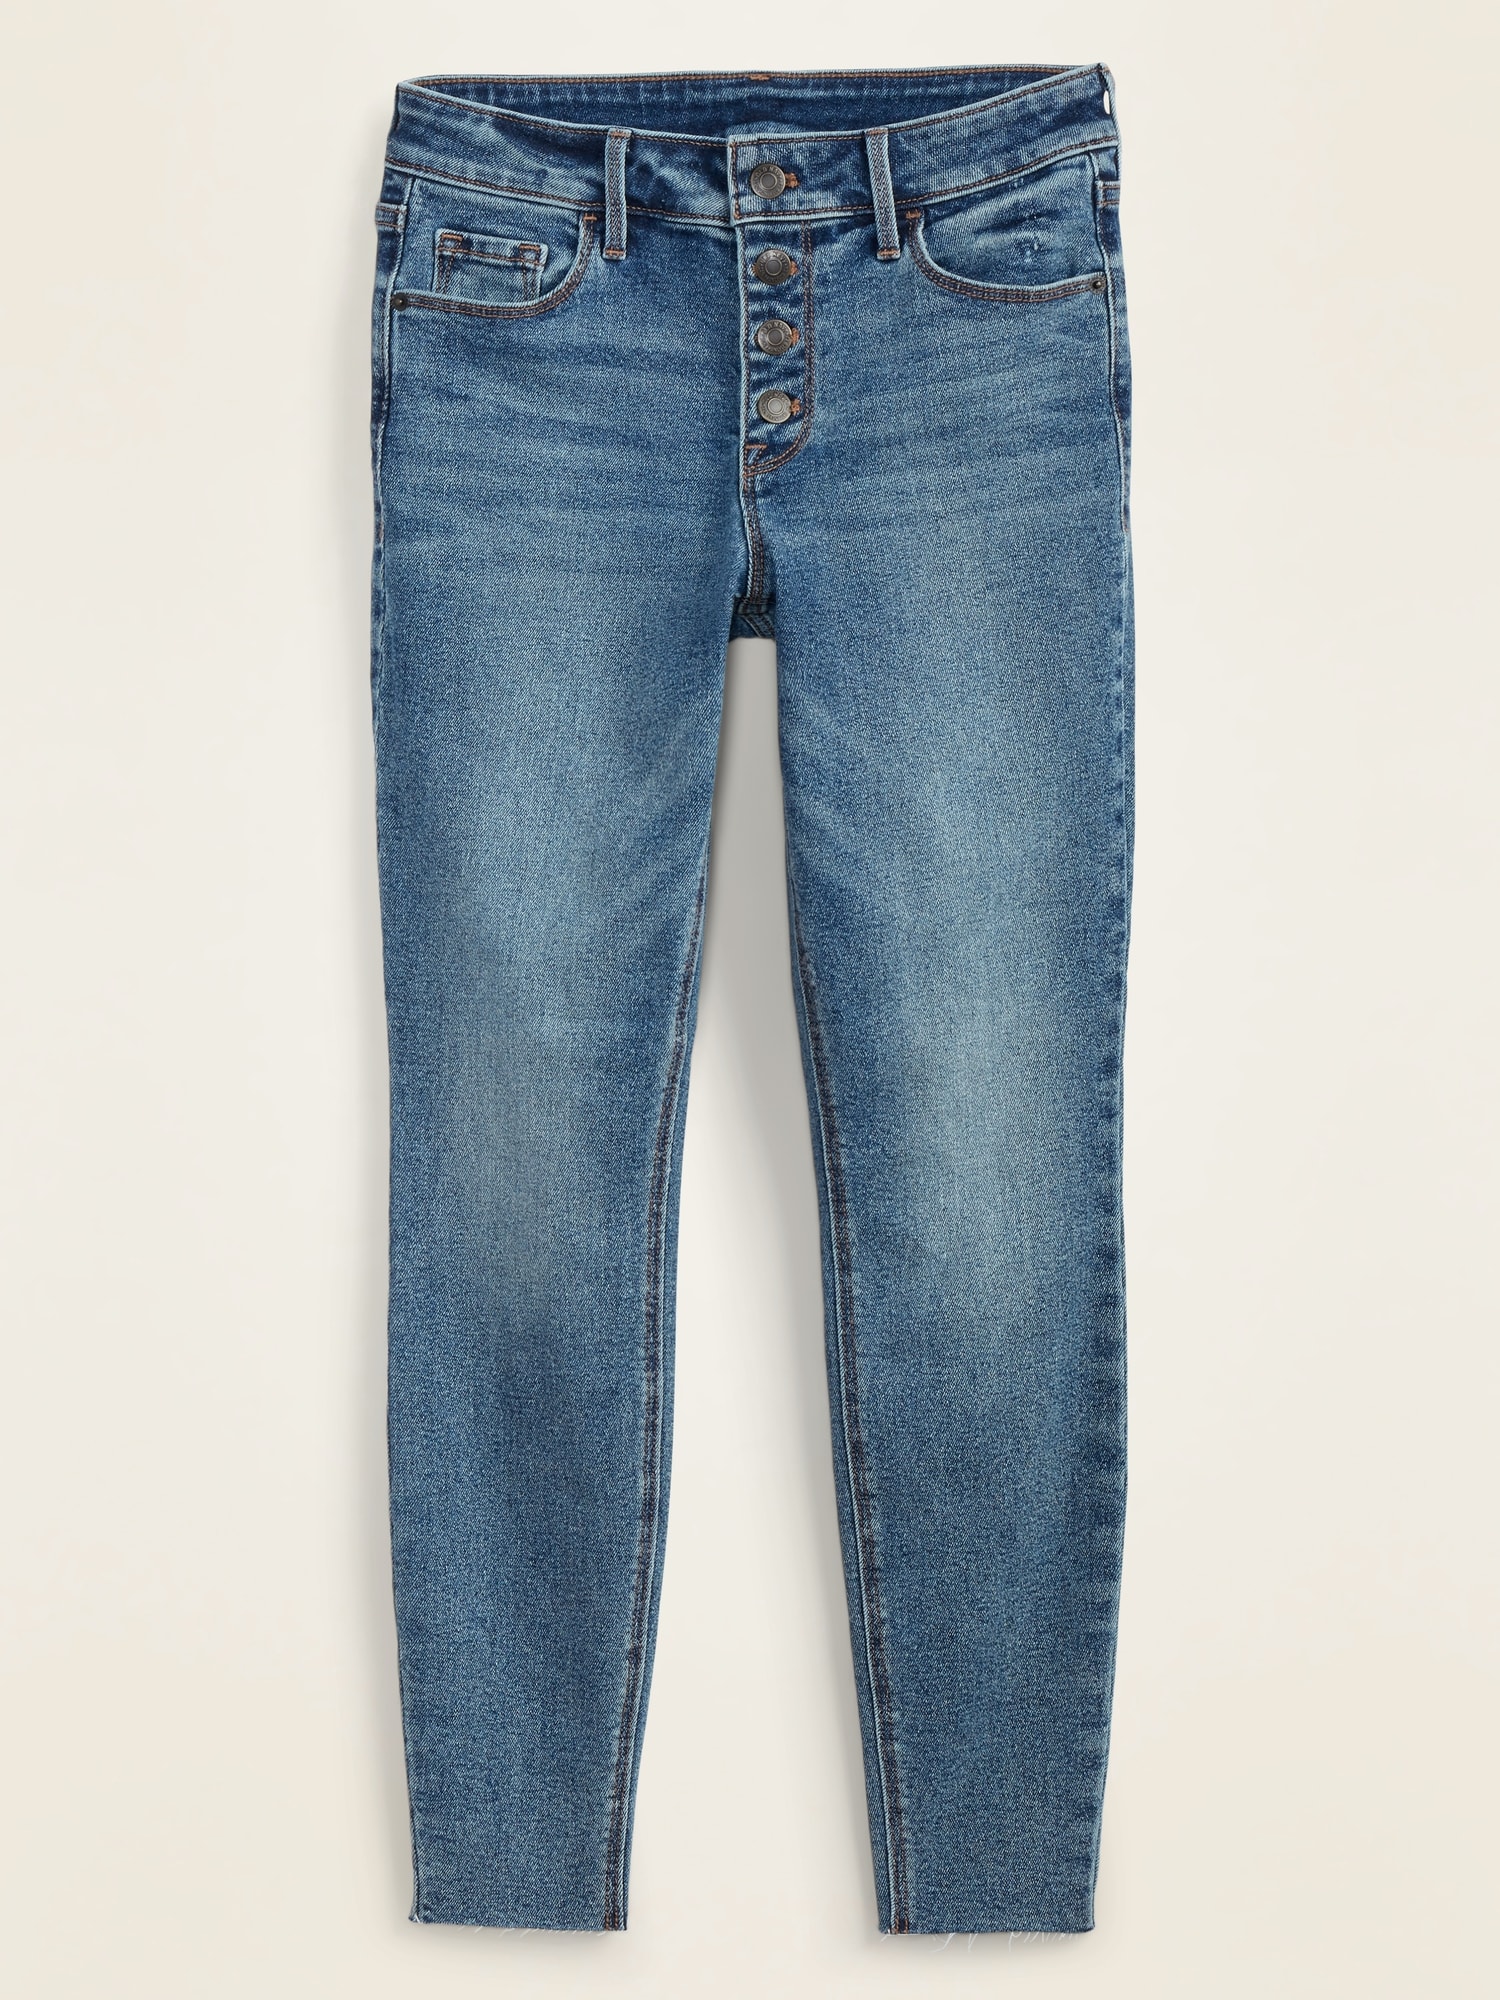 ankle cut skinny jeans